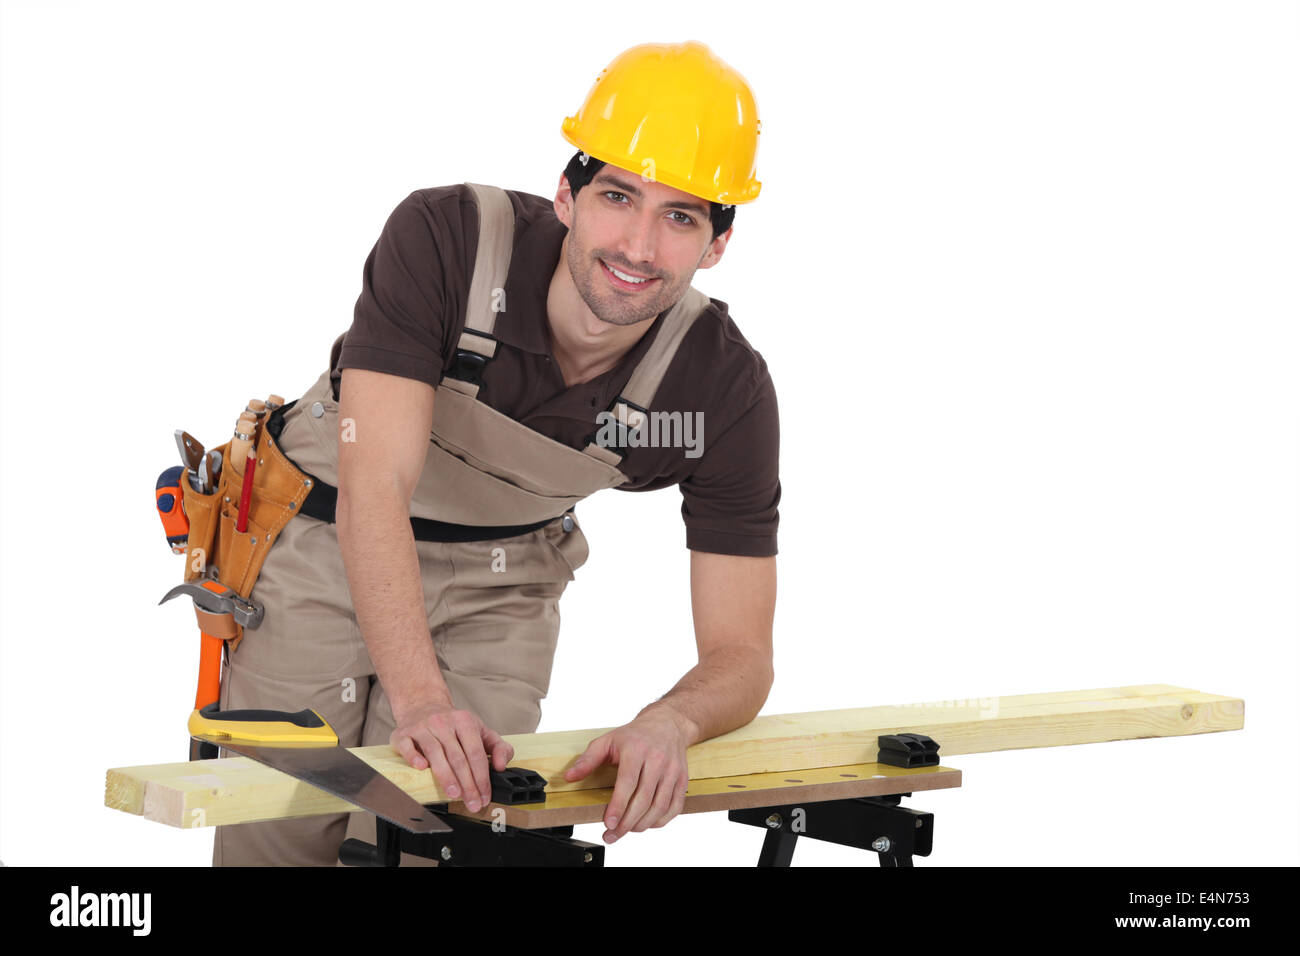 carpenter sawing a plank Stock Photo